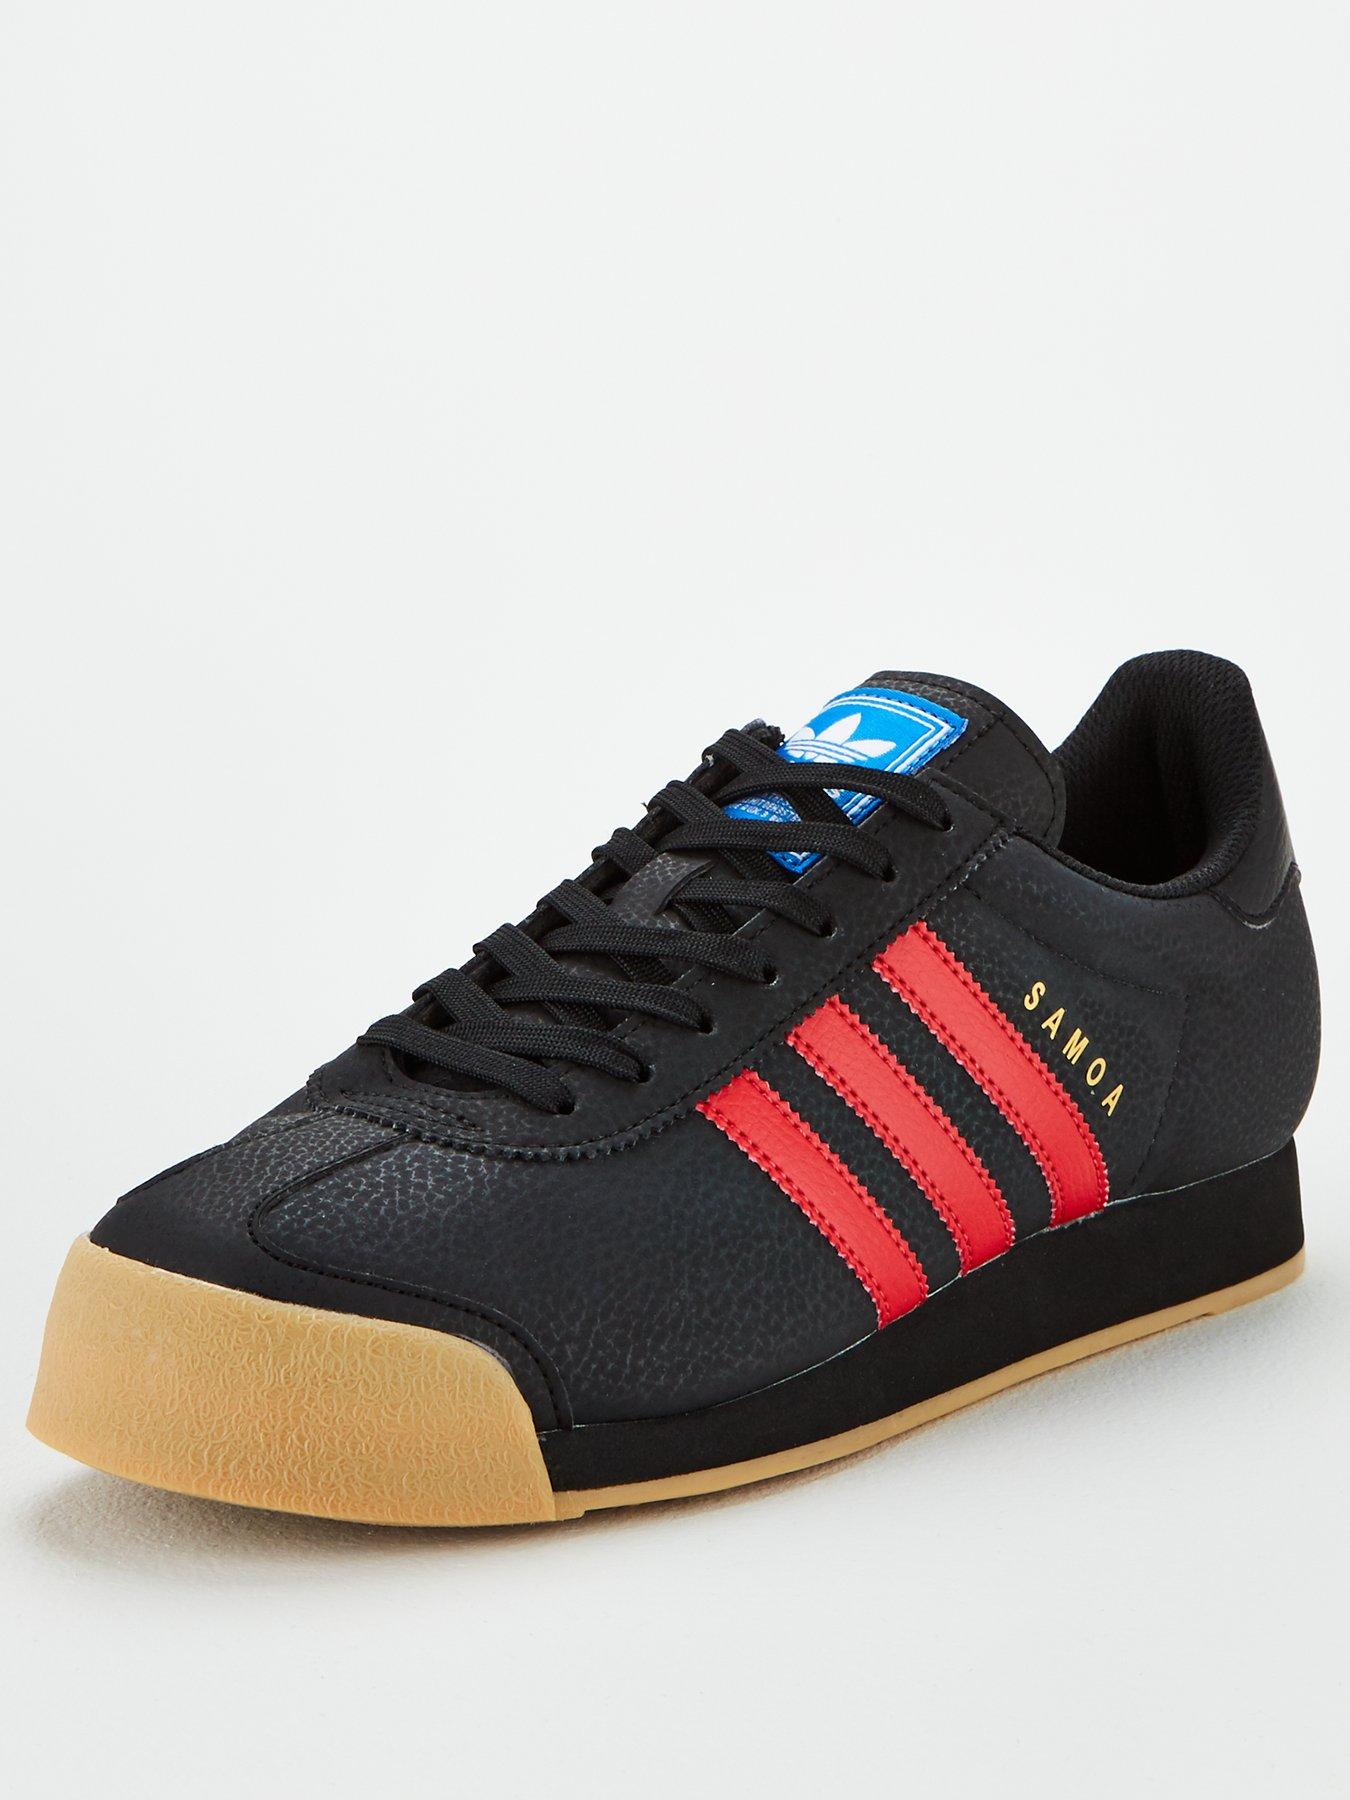 adidas trainers black and red